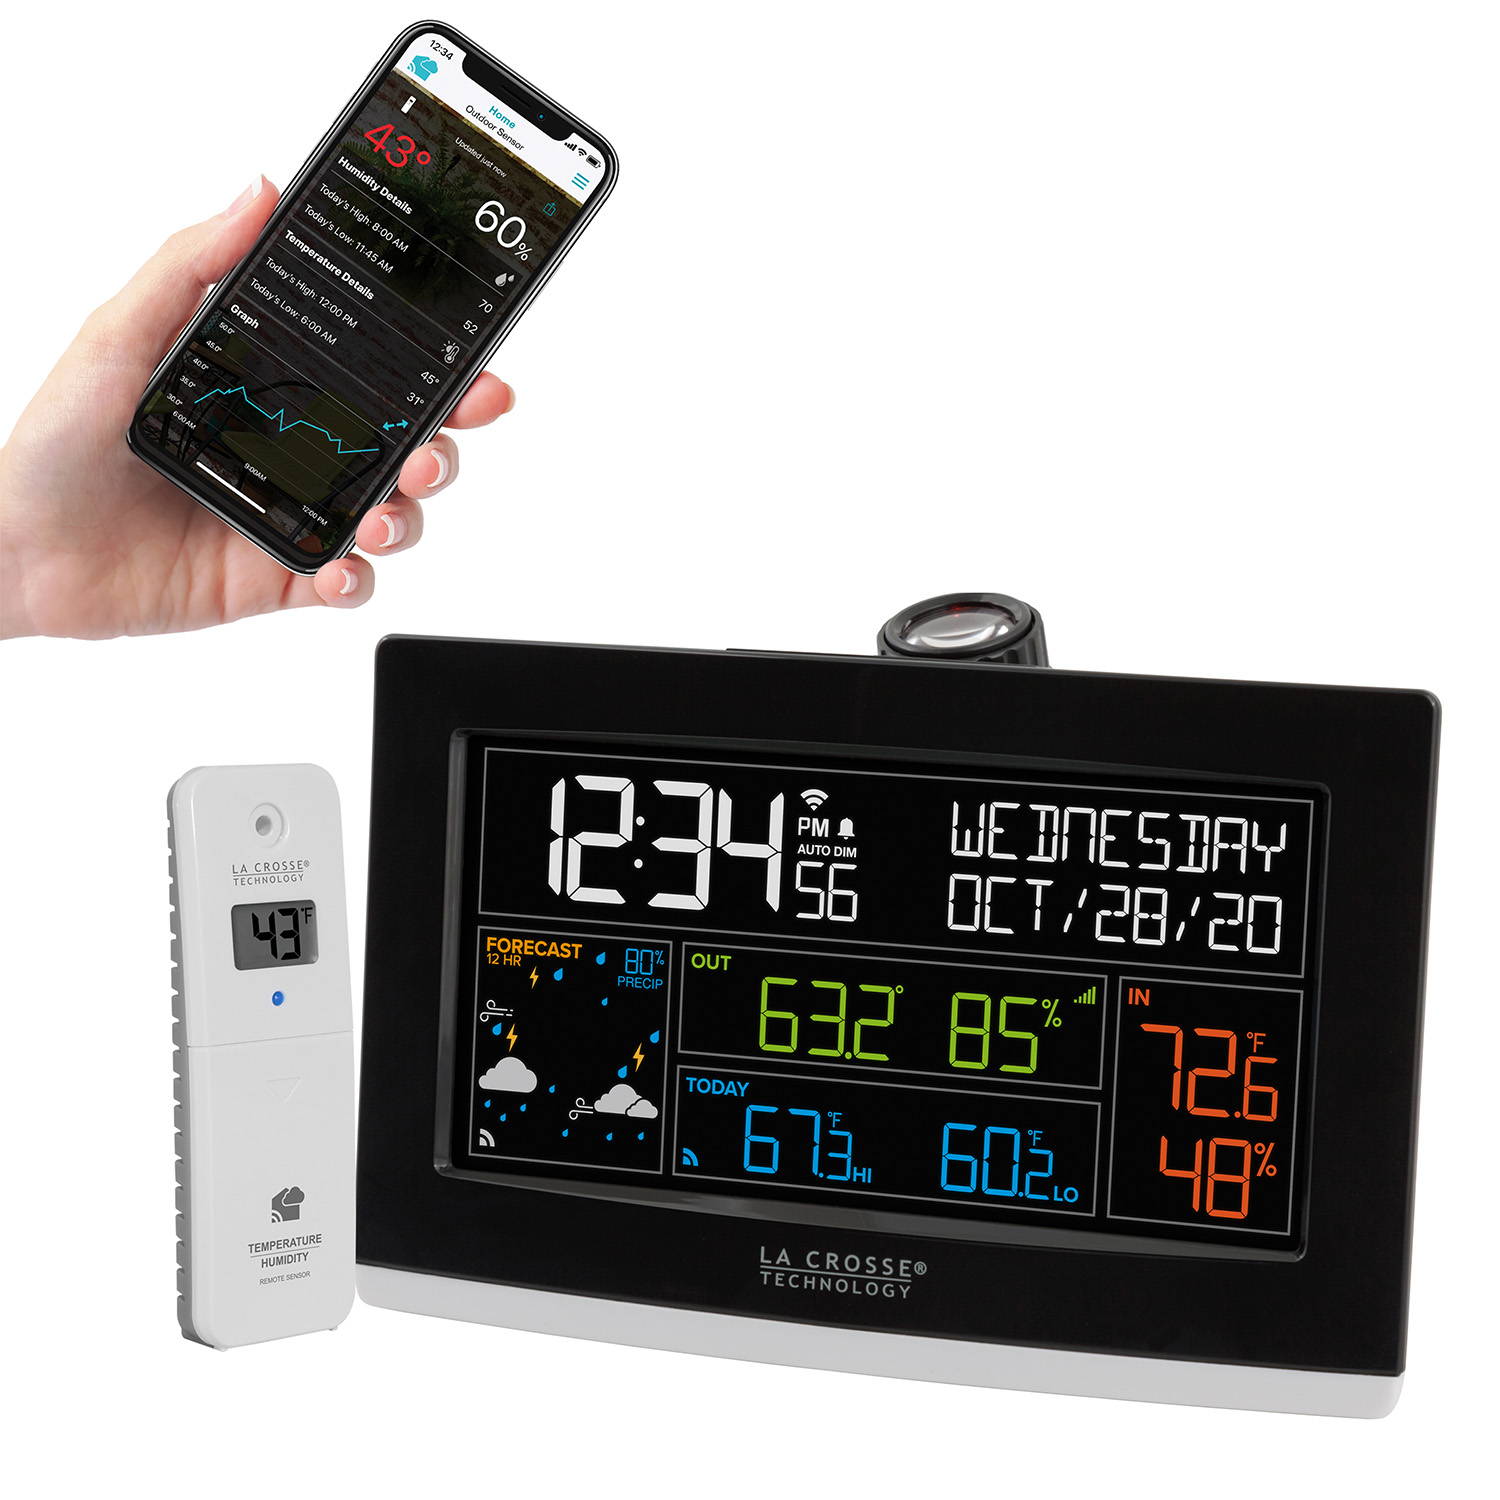 VA1 Wi-Fi Projection Alarm Clock with Outdoor Temp and Humidity